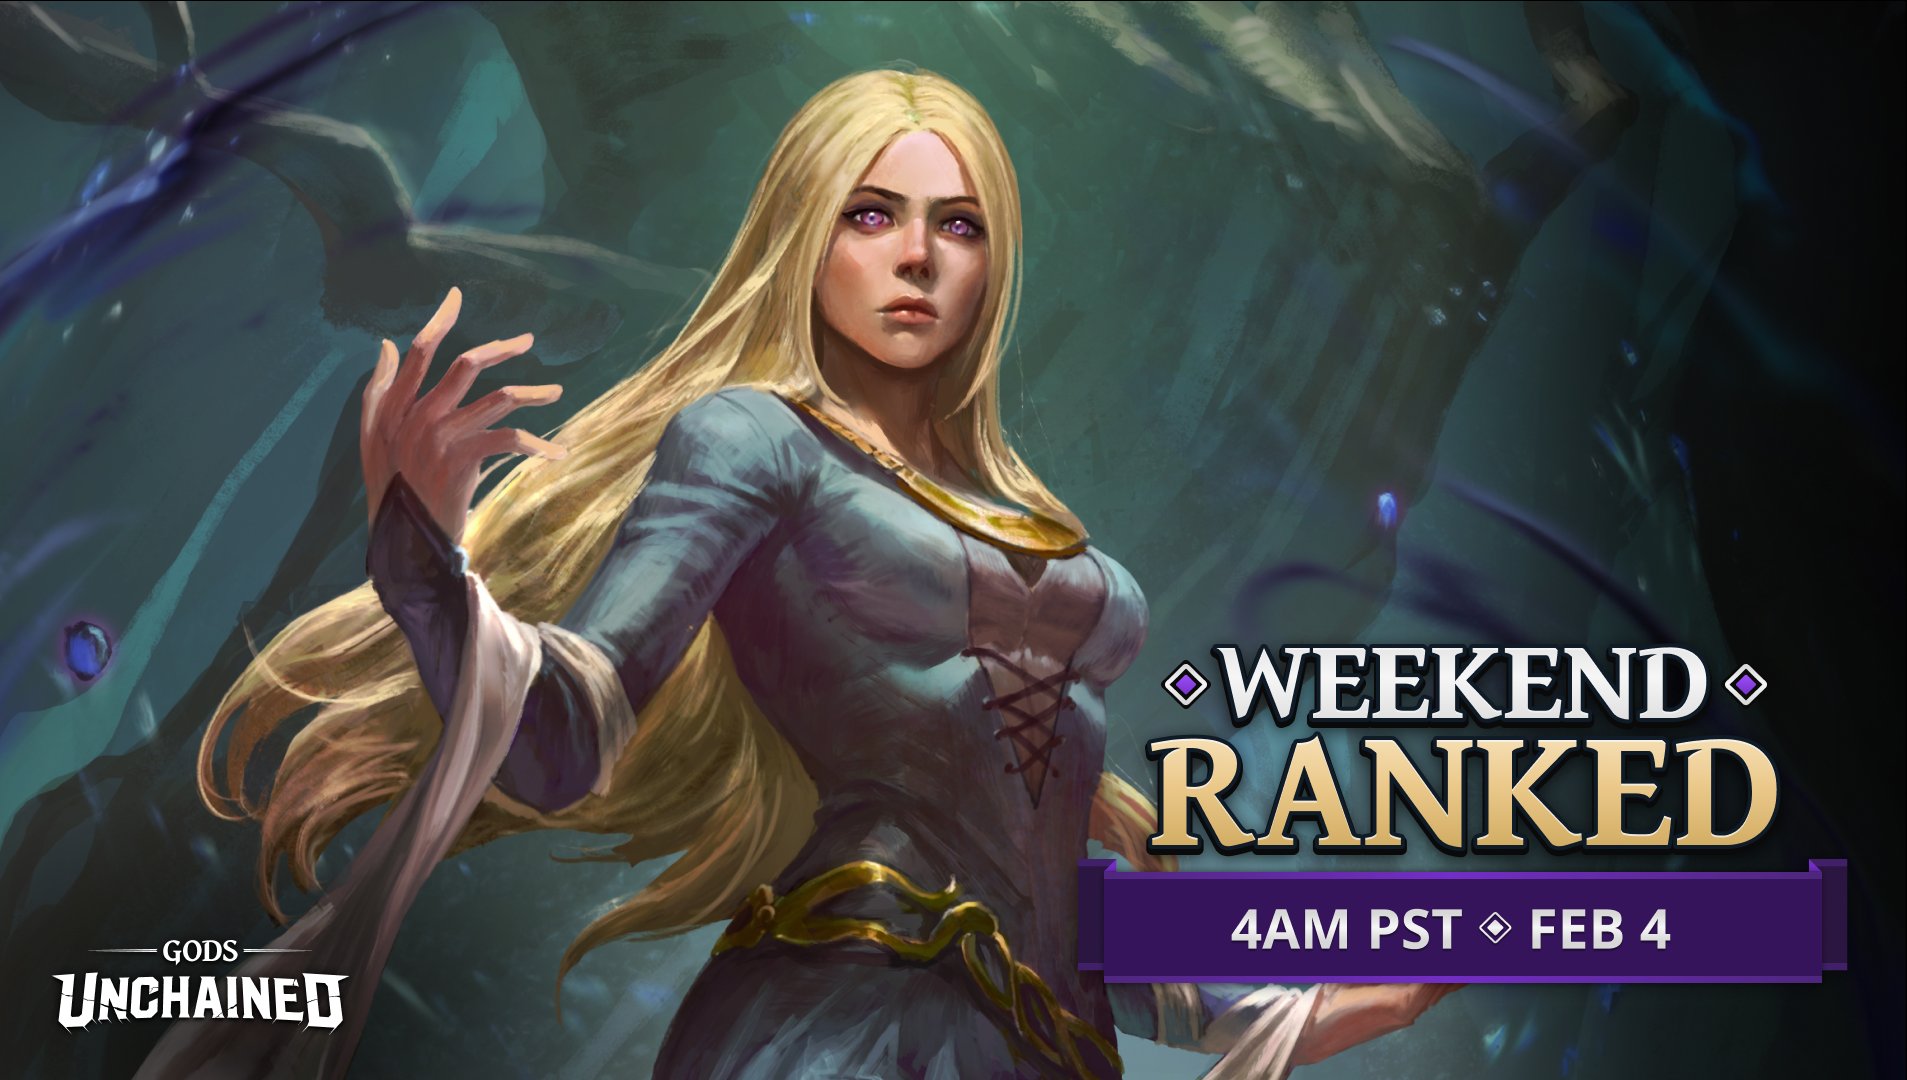 Gods Unchained Ranked Weekend banner